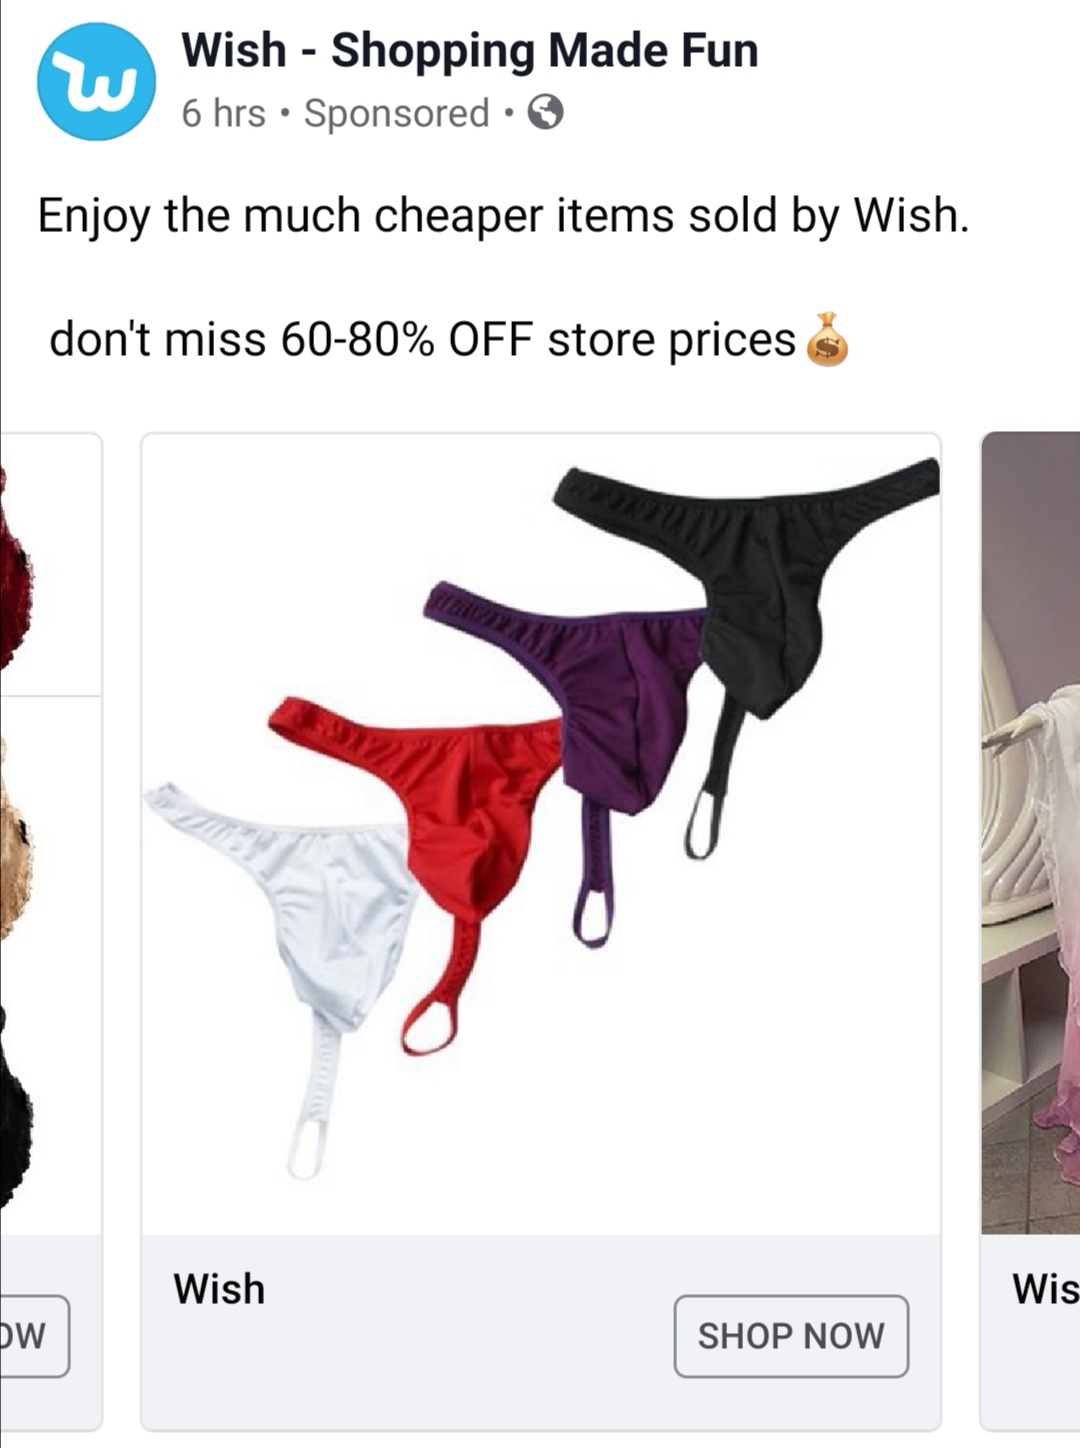 enjoy the much cheaper items sold by wish don t miss 60 80 off store prices - Wish Shopping Made Fun 6 hrs Sponsored Enjoy the much cheaper items sold by Wish. don't miss 6080% Off store prices s Wish Wis Dw Shop Now